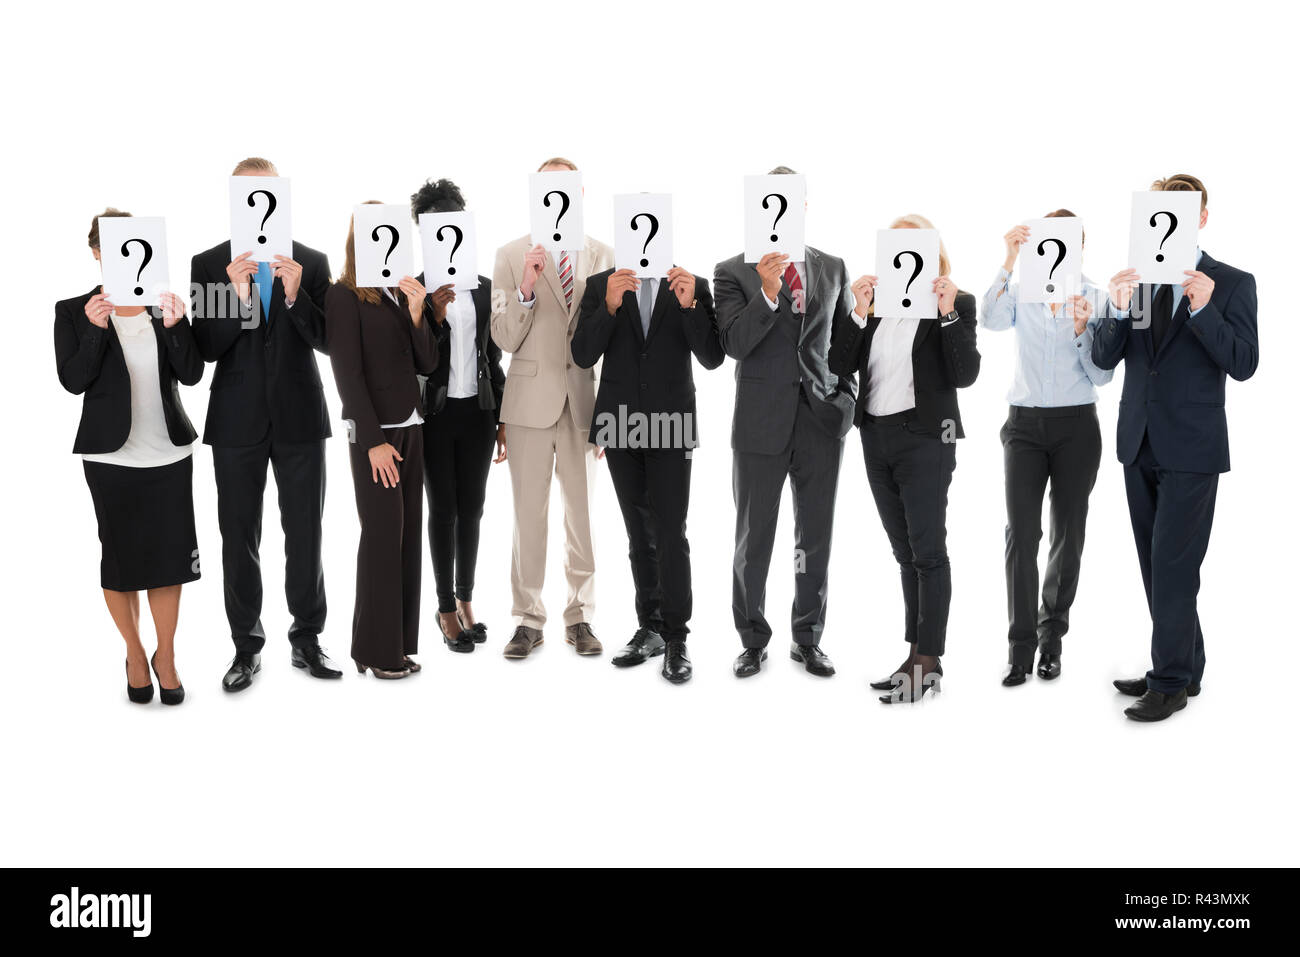 Business Team Hiding Faces With Question Mark Signs Stock Photo